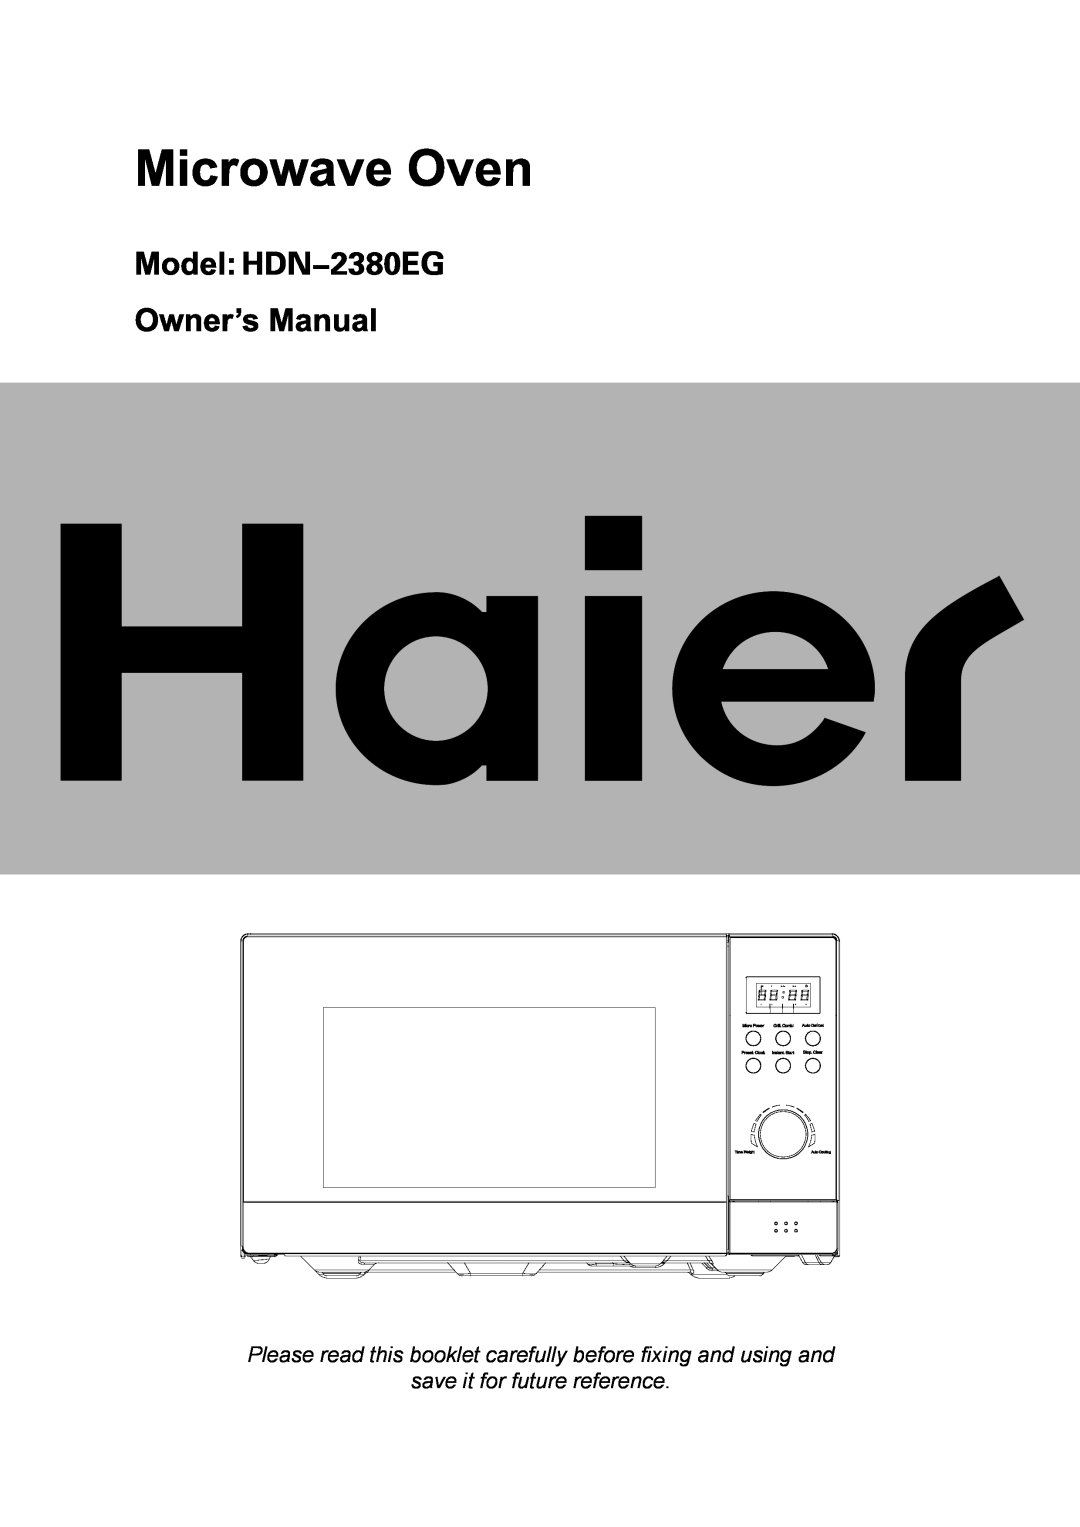 Haier HDN-2380EG manual save it for future reference, MW G Auto Def 